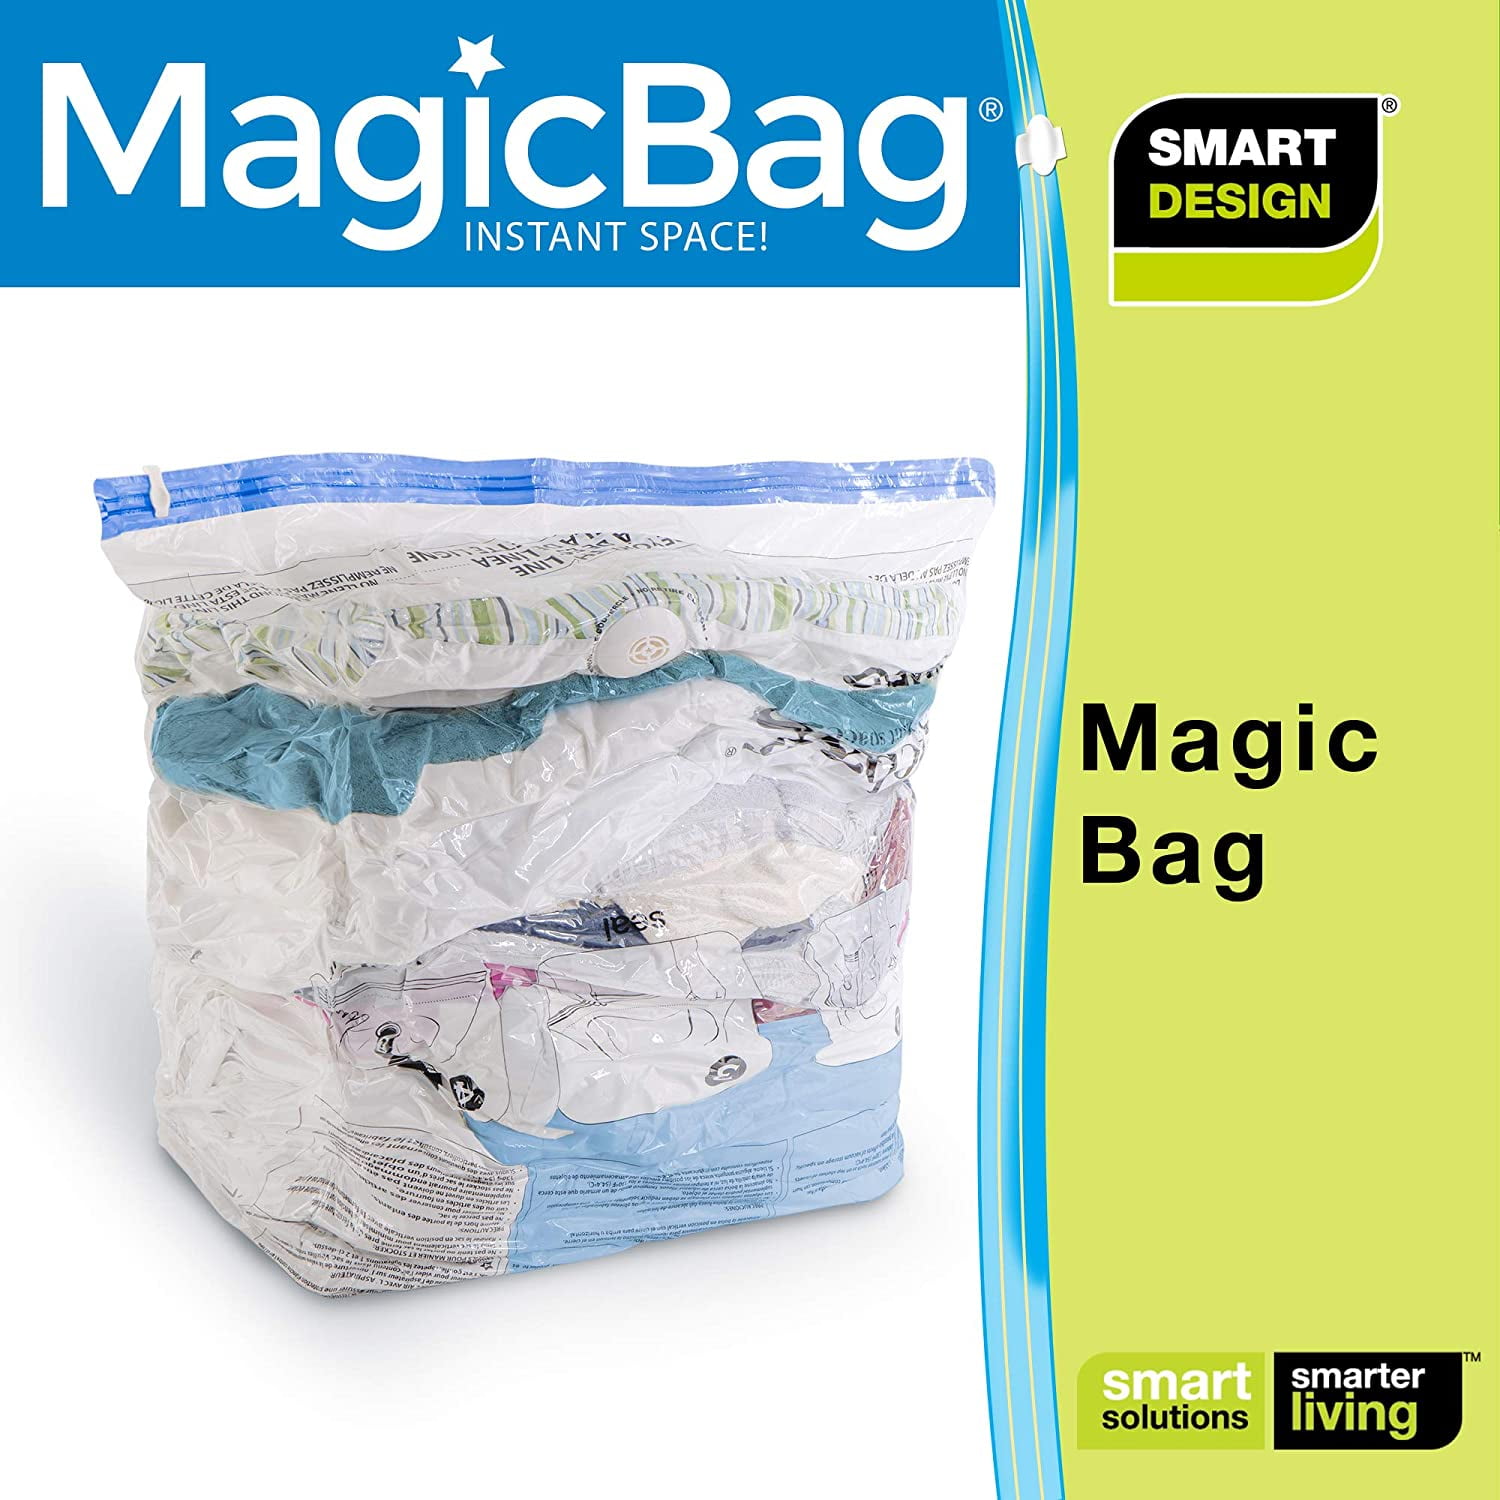 Magicbag Vacuum Jumbo Bags Product Review - Great For Packing 